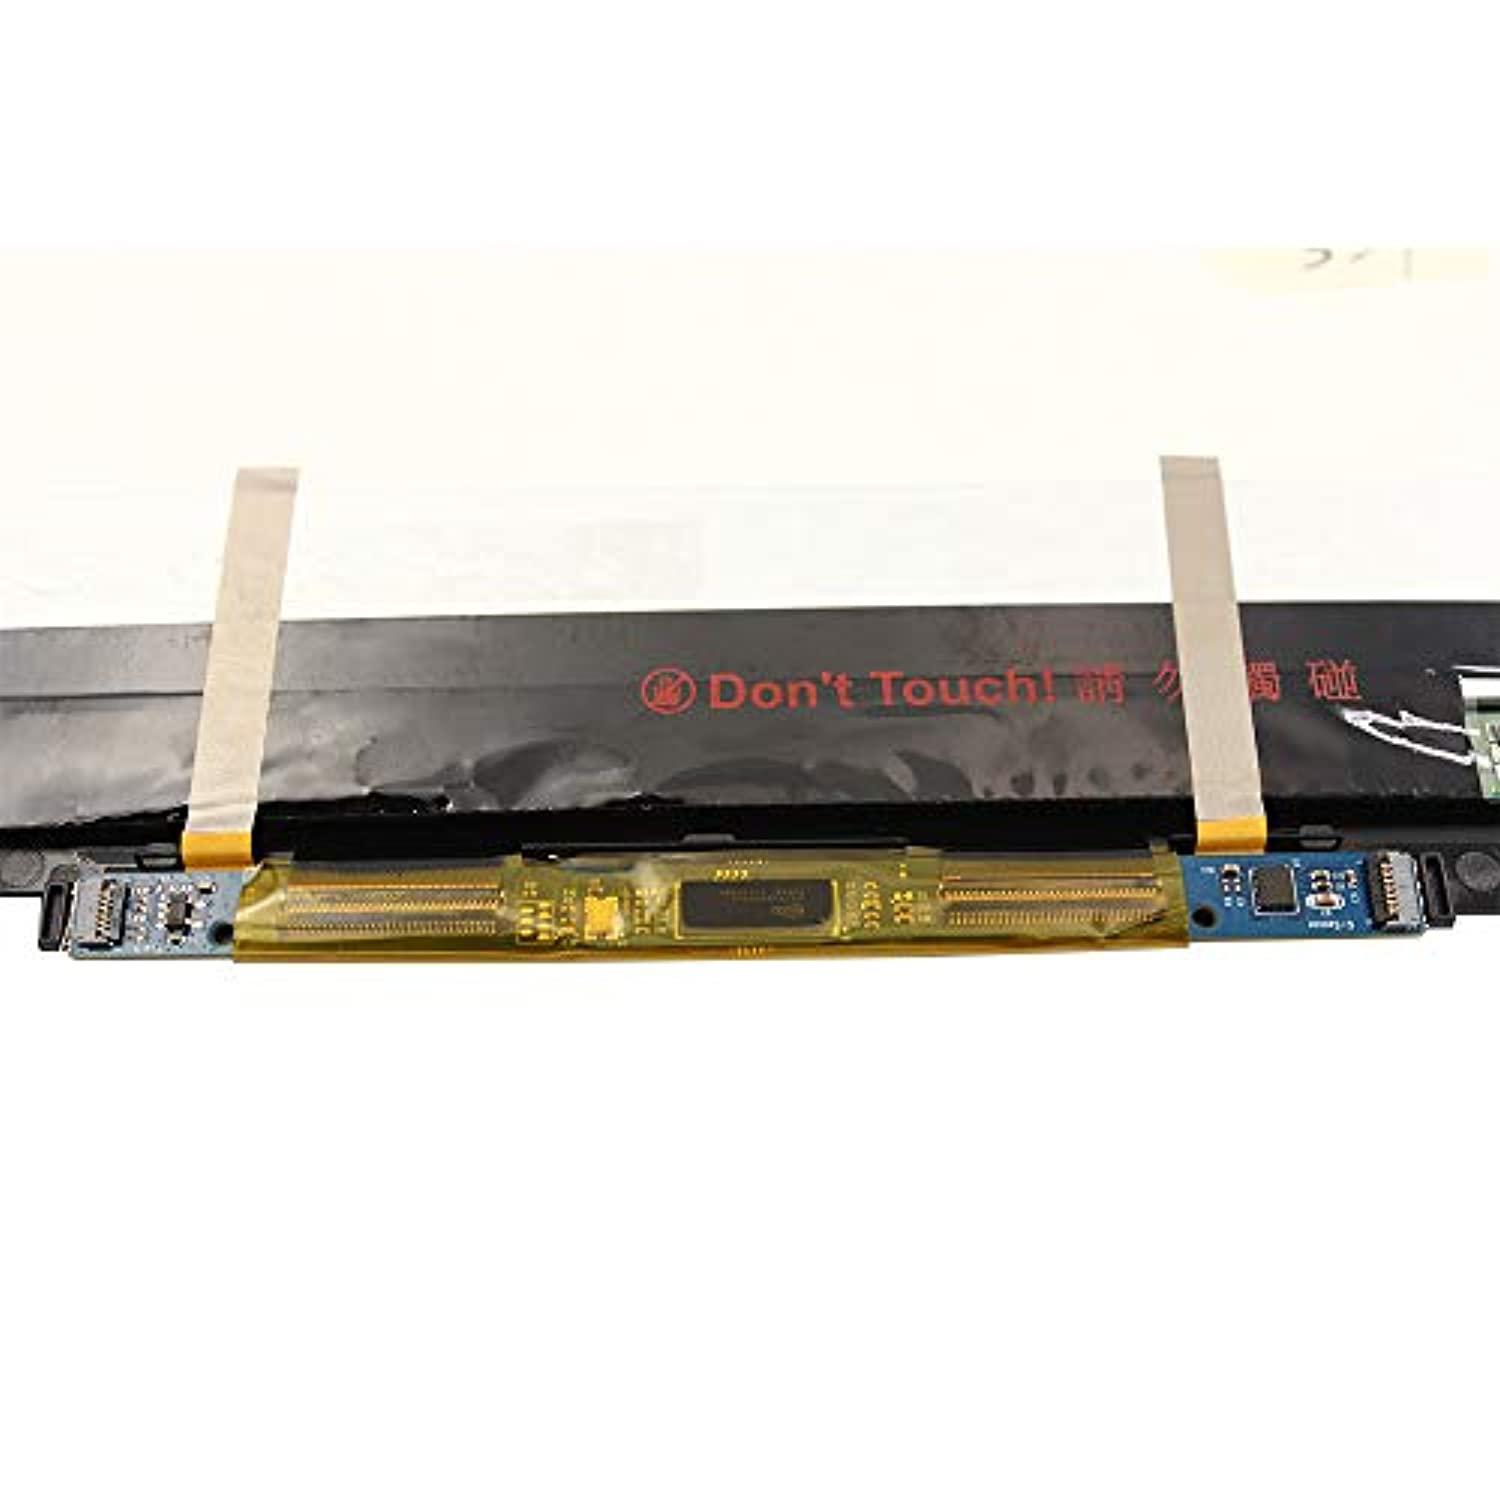 firstlcd lcd touch screen replacement l20826-001 for (hp) pavilion x360 15-cr0055od 15-cr0087cl 15-cr0095nr 15-cr0056wm 15-cr